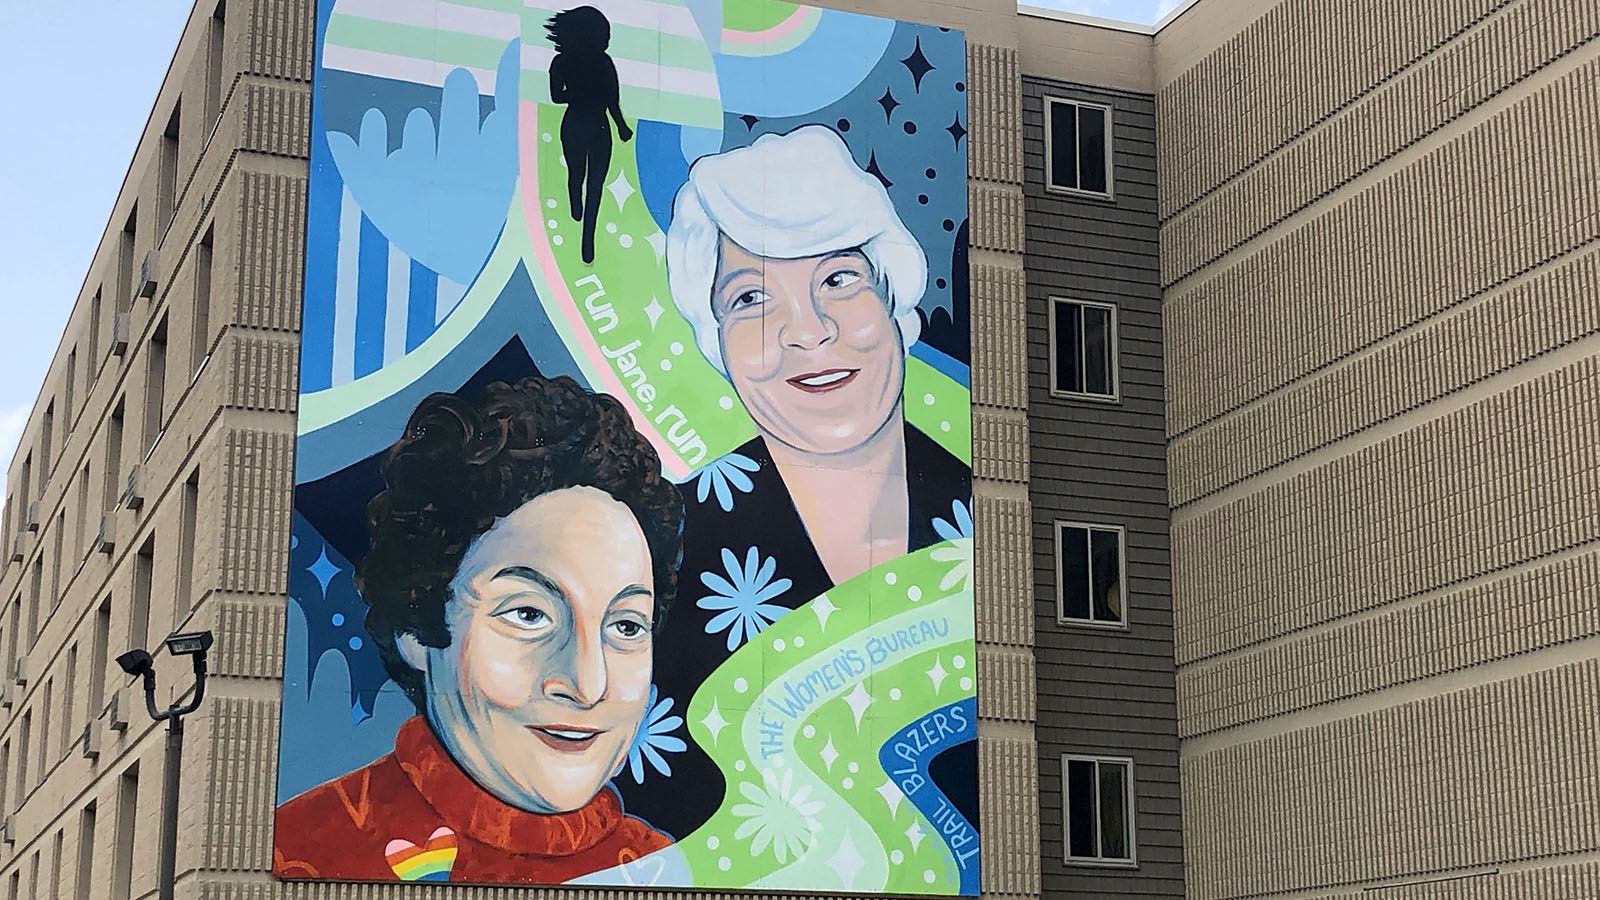 The latest Faces of the Fort mural is on the Edsall Apartments building downtown.